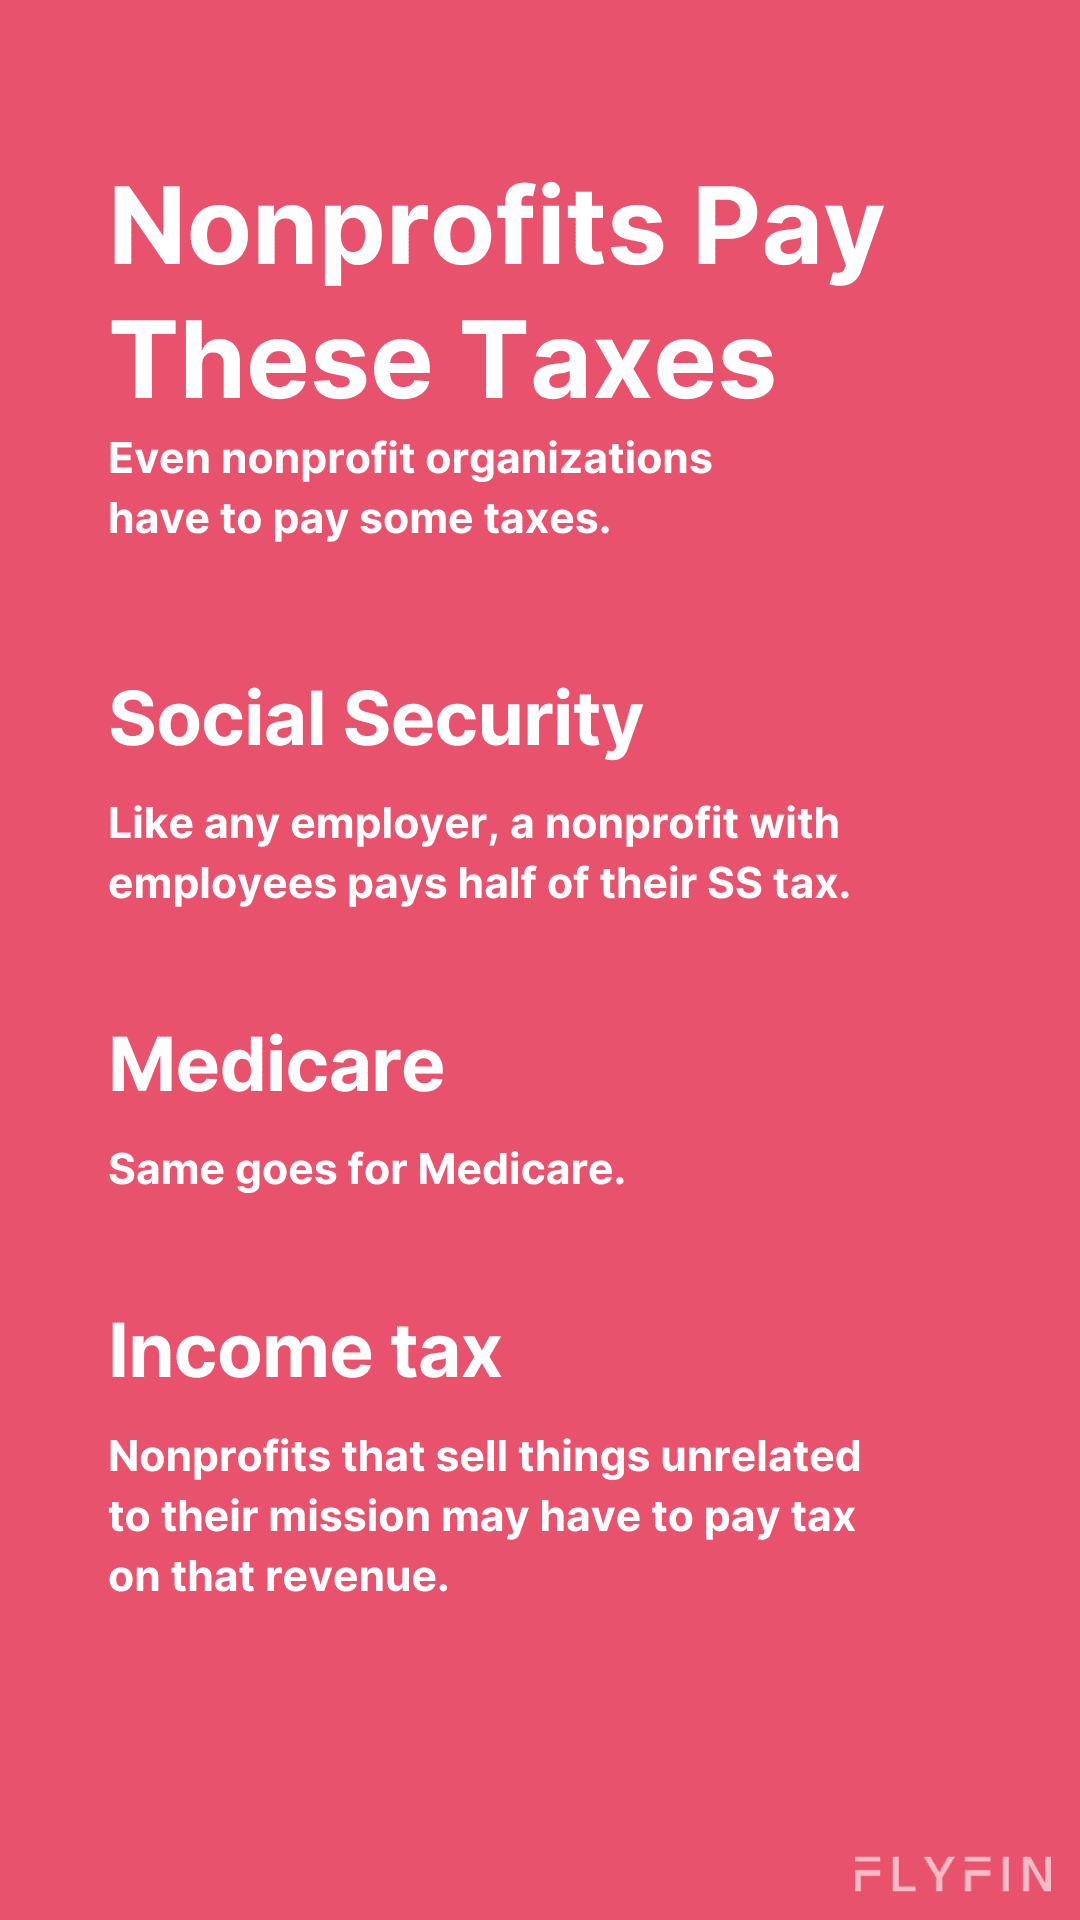 Image describing taxes paid by nonprofits including Social Security, Medicare, and income tax on revenue from unrelated sales. No mention of self-employed, 1099 or freelancer.